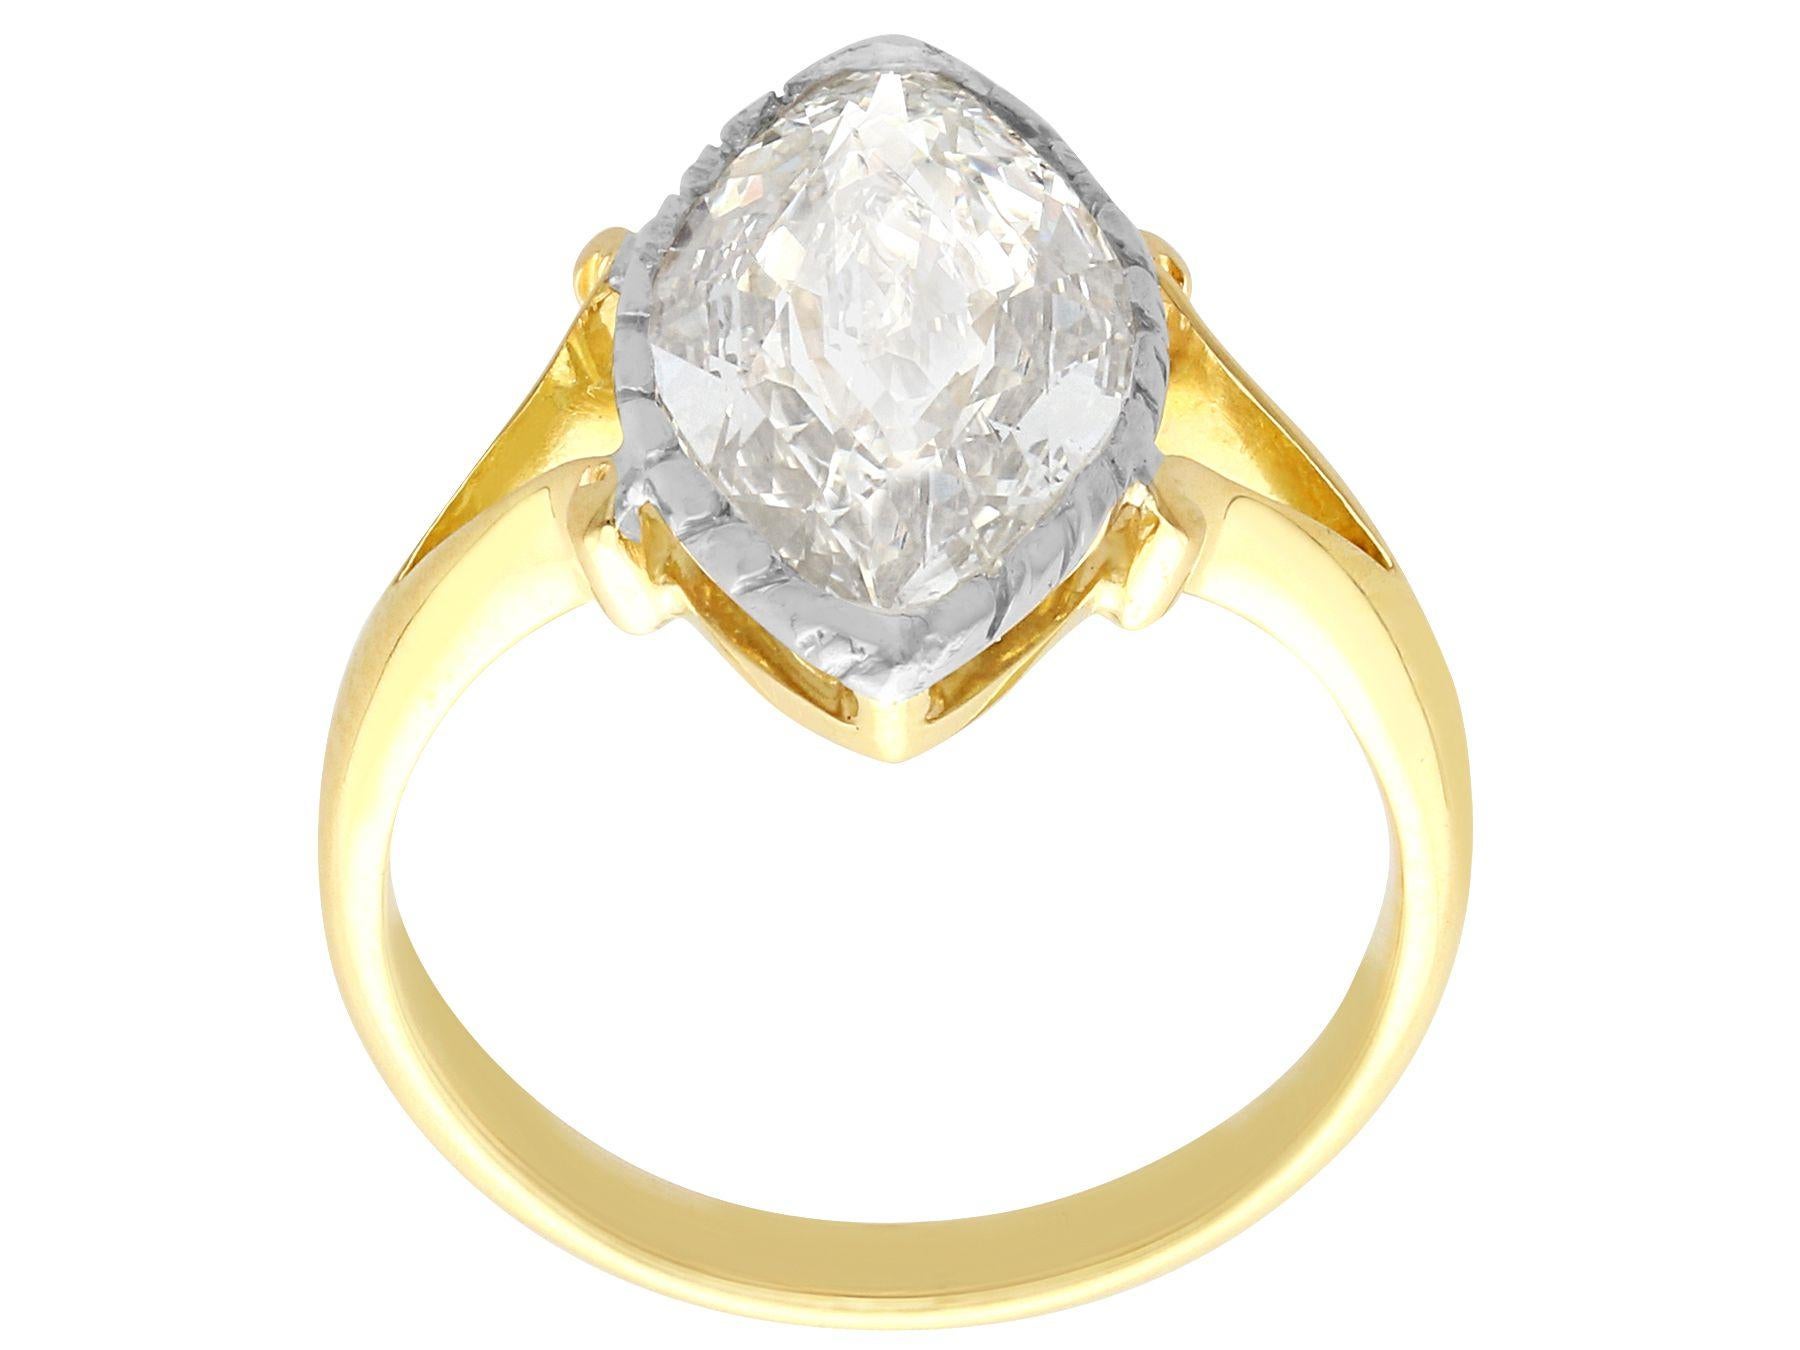 Marquise Cut Antique 2.35 Carat Diamond and Yellow Gold Solitaire Ring, Circa 1900